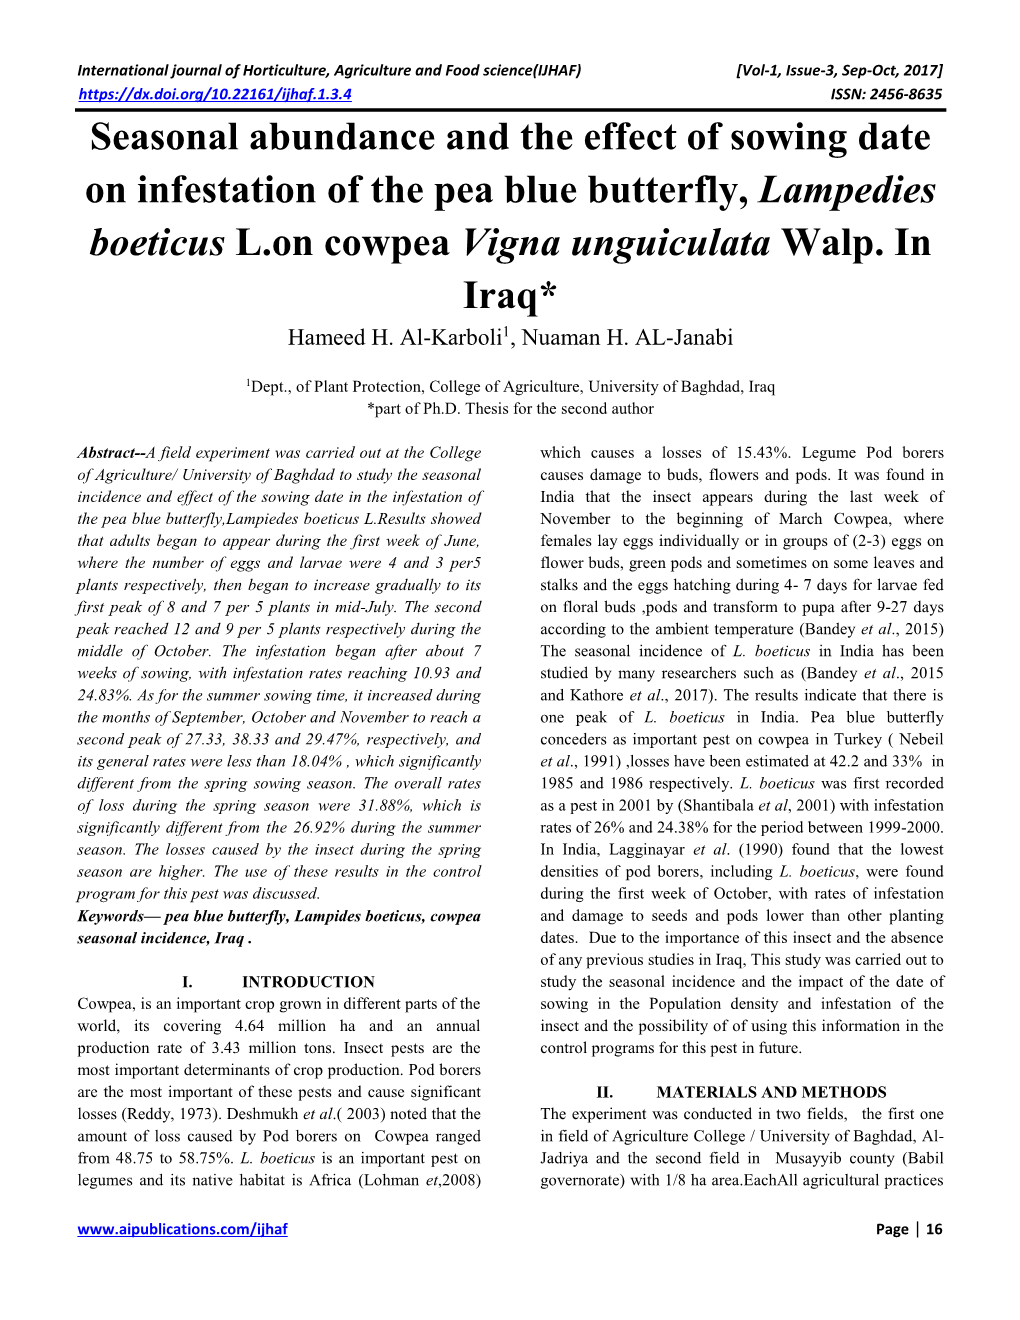 Seasonal Abundance and the Effect of Sowing Date on Infestation of the Pea Blue Butterfly, Lampedies Boeticus L.On Cowpea Vigna Unguiculata Walp